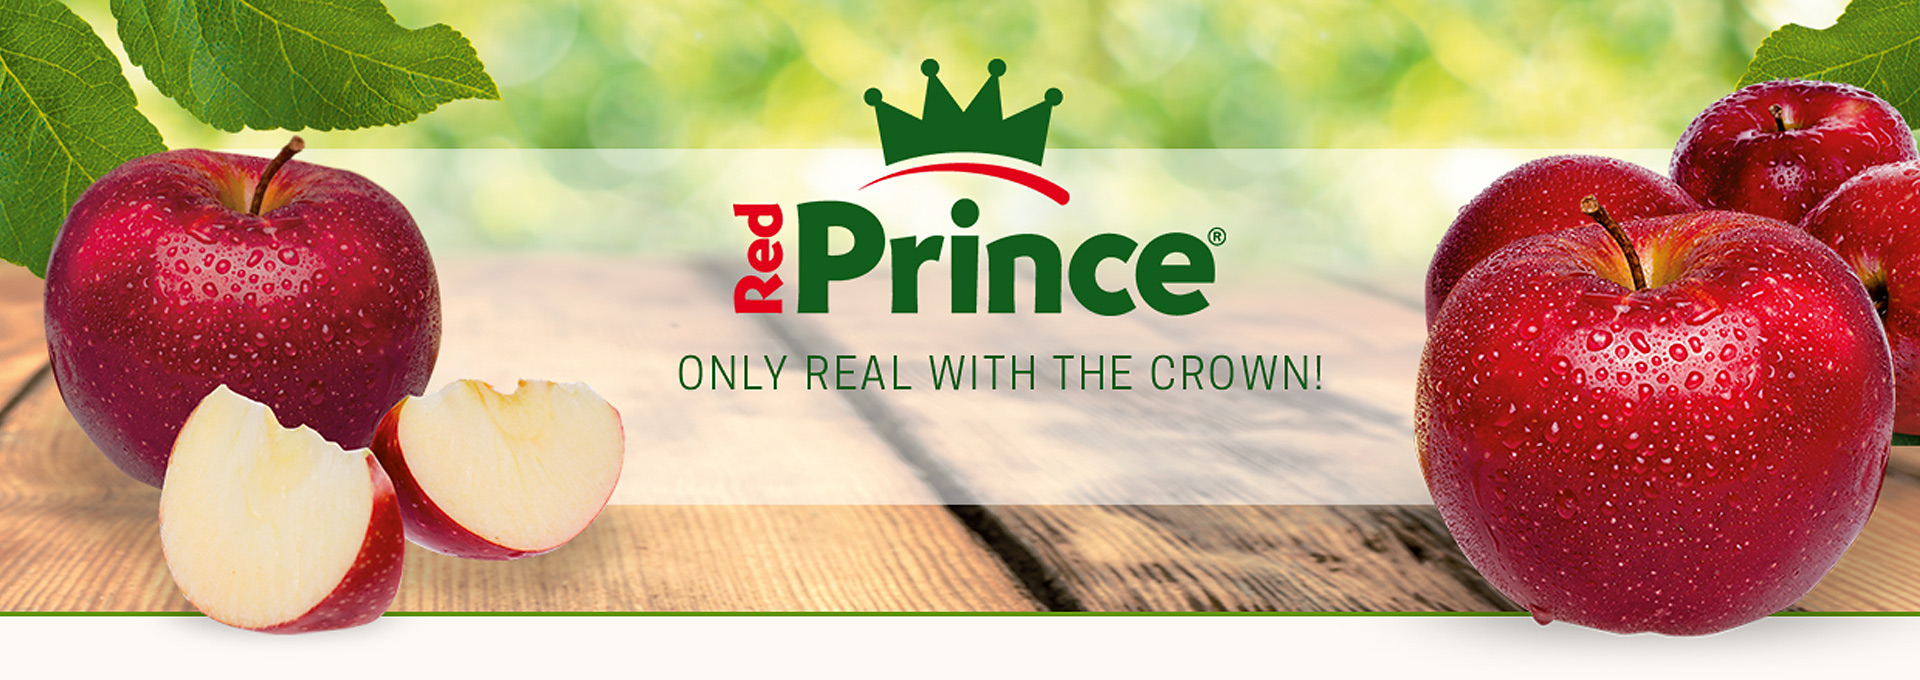 Red Prince® sets itself apart from other apples